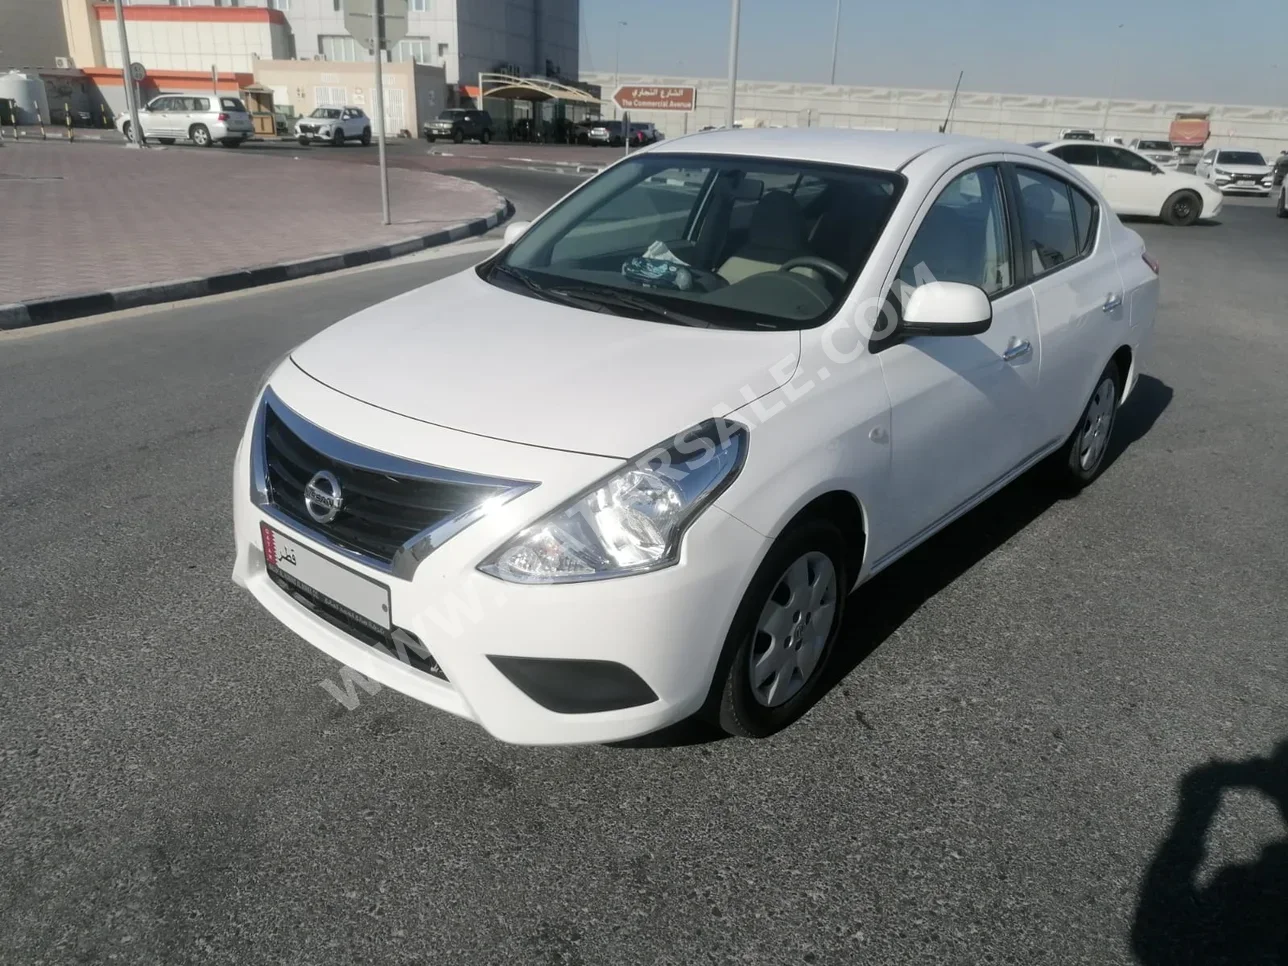 Nissan  Sunny  2022  Automatic  25,000 Km  4 Cylinder  Front Wheel Drive (FWD)  Sedan  White  With Warranty